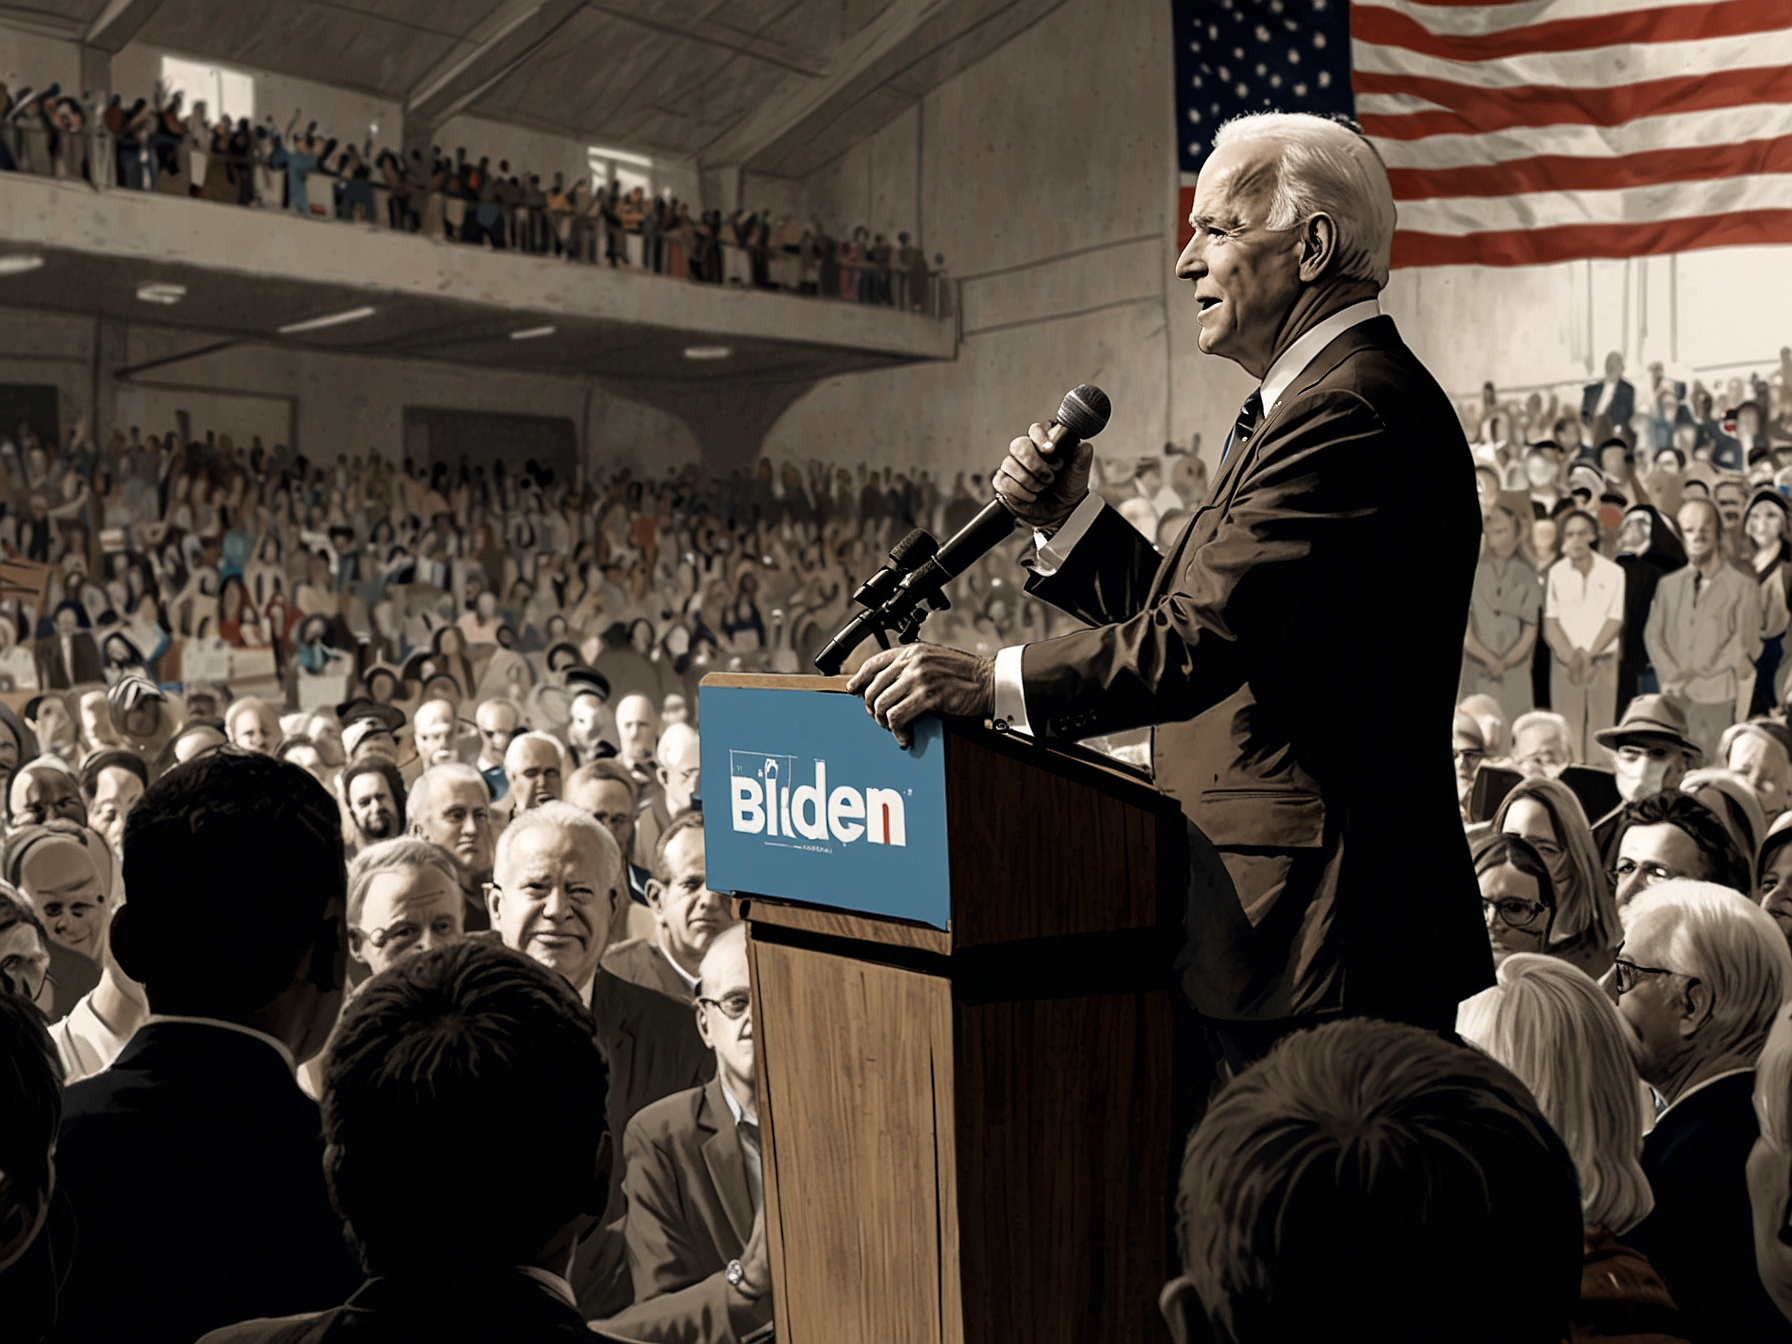 President Joe Biden addressing a crowd at a campaign event, expressing gratitude for Kinzinger's support. The endorsement highlights Biden’s effort to appeal to moderate Republicans and independents.